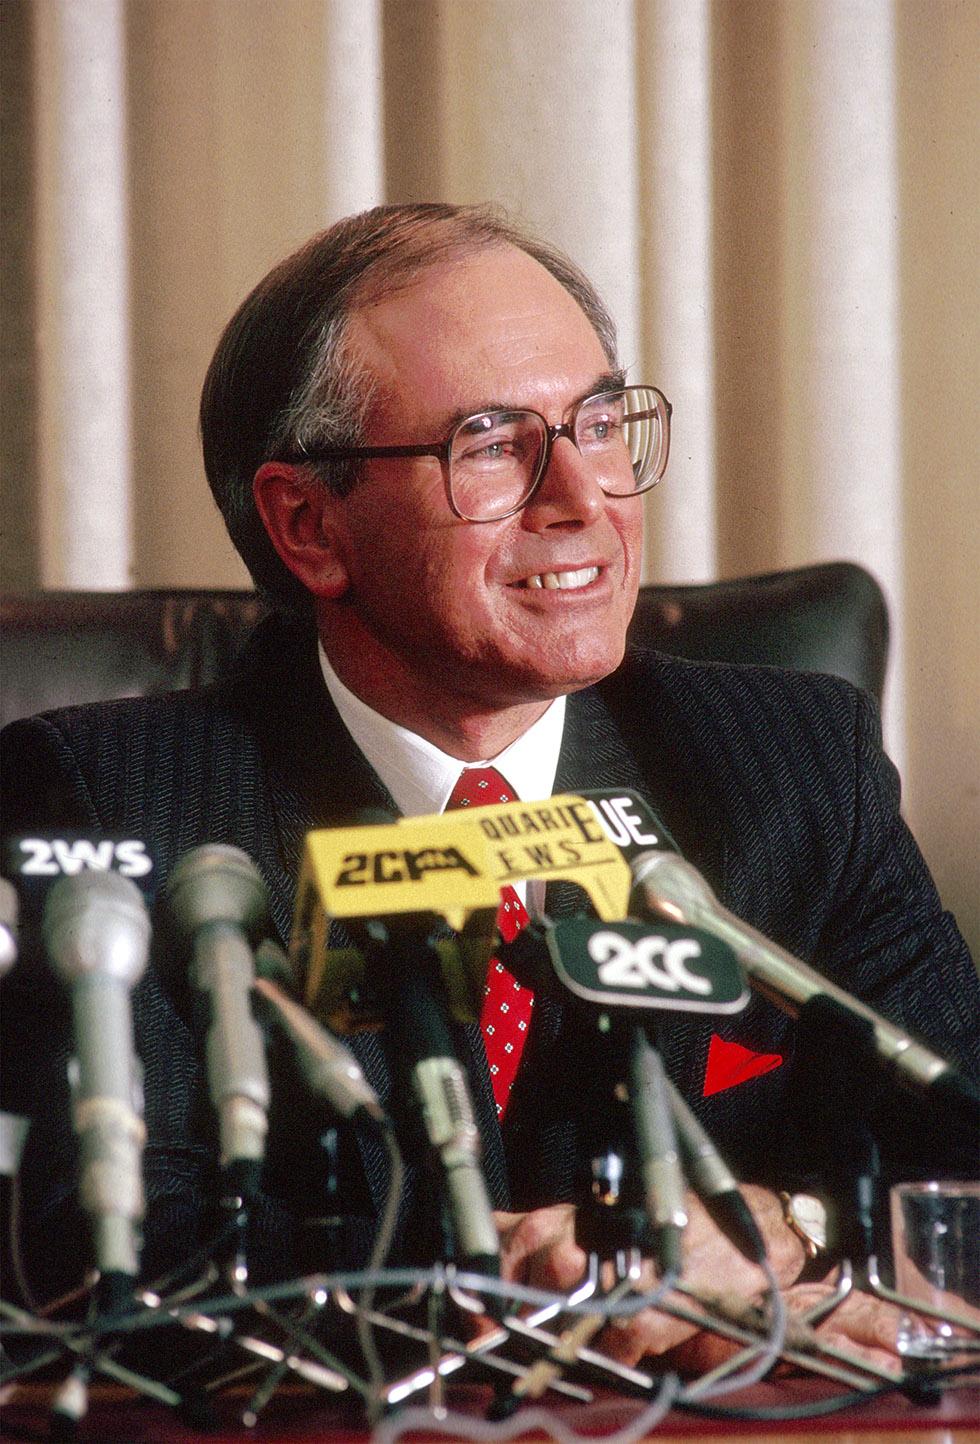 John Howard, Leader of the Opposition, at a Liberal Party press conference in 1987.